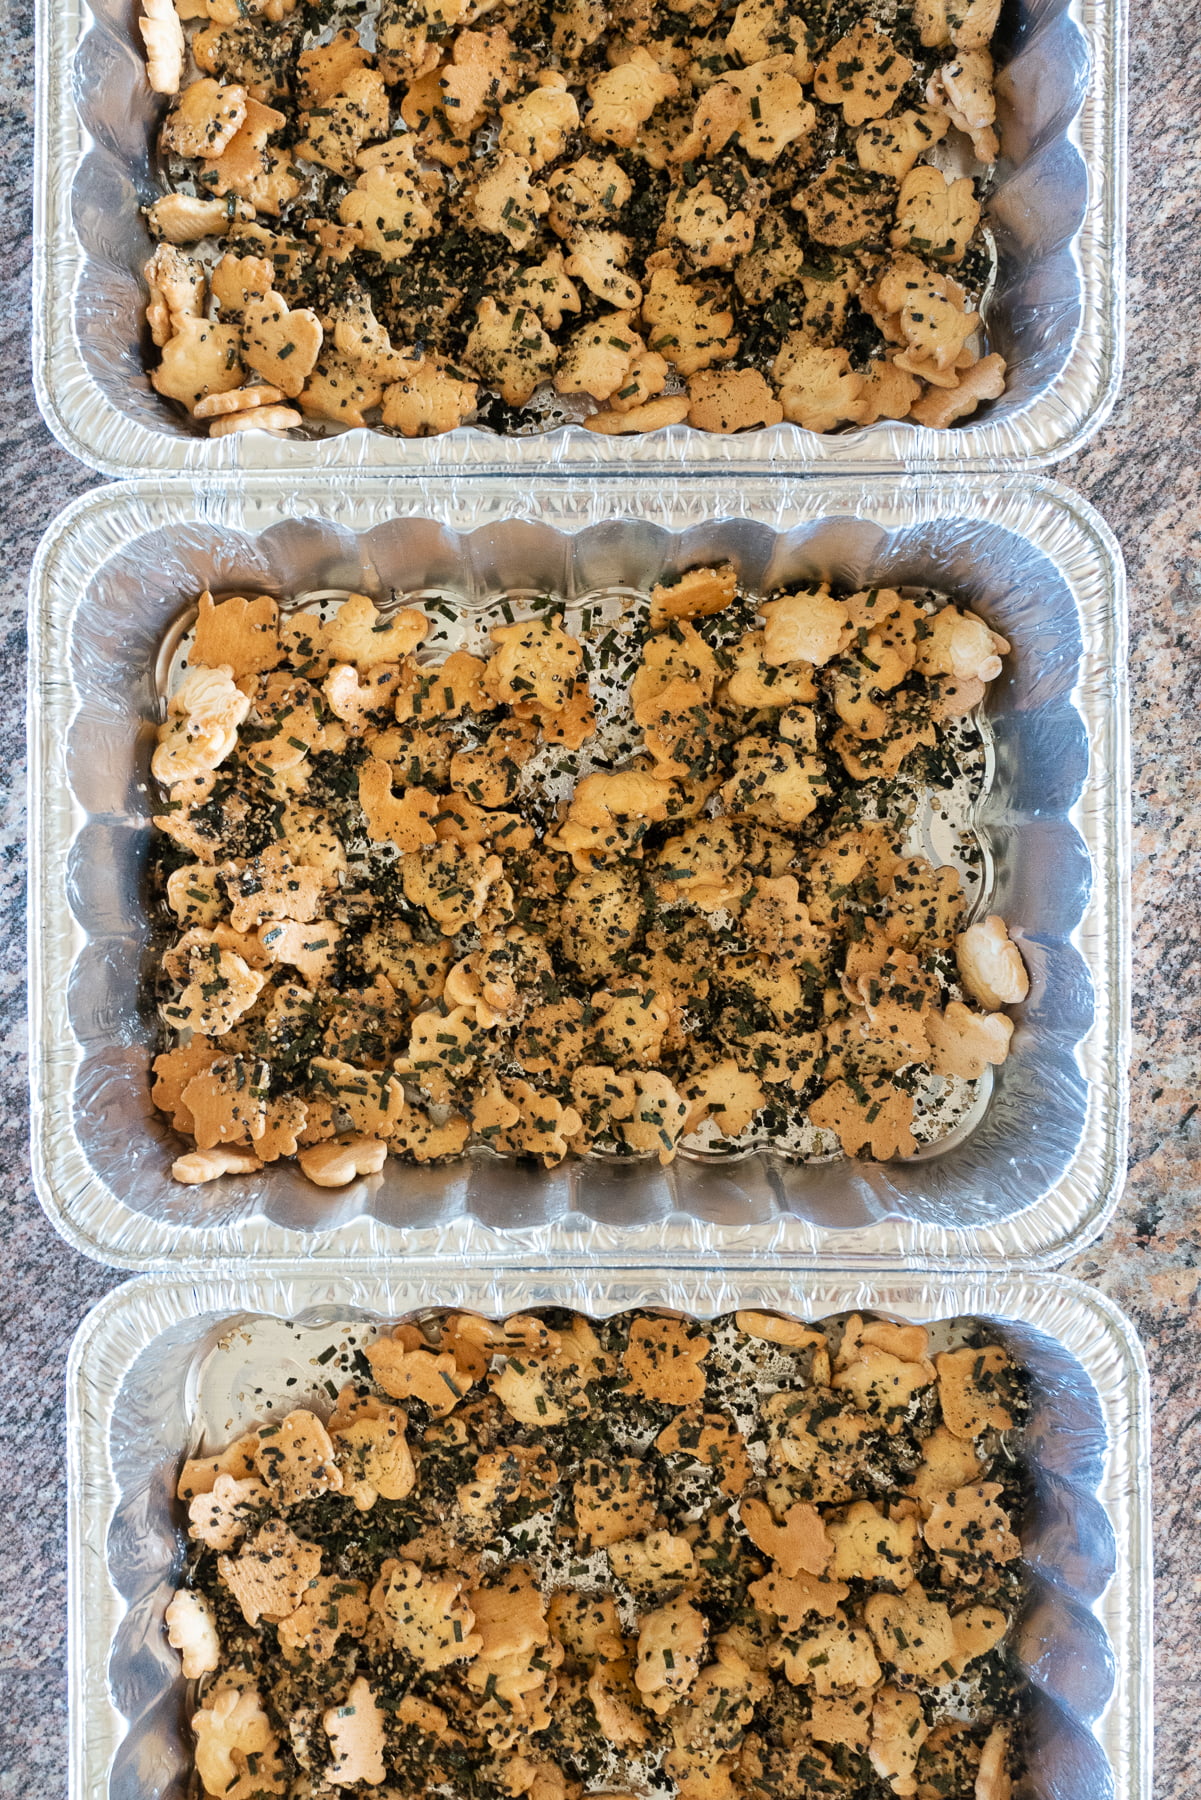 Three trays of animal crackers tossed with syrup mixture and furikake.